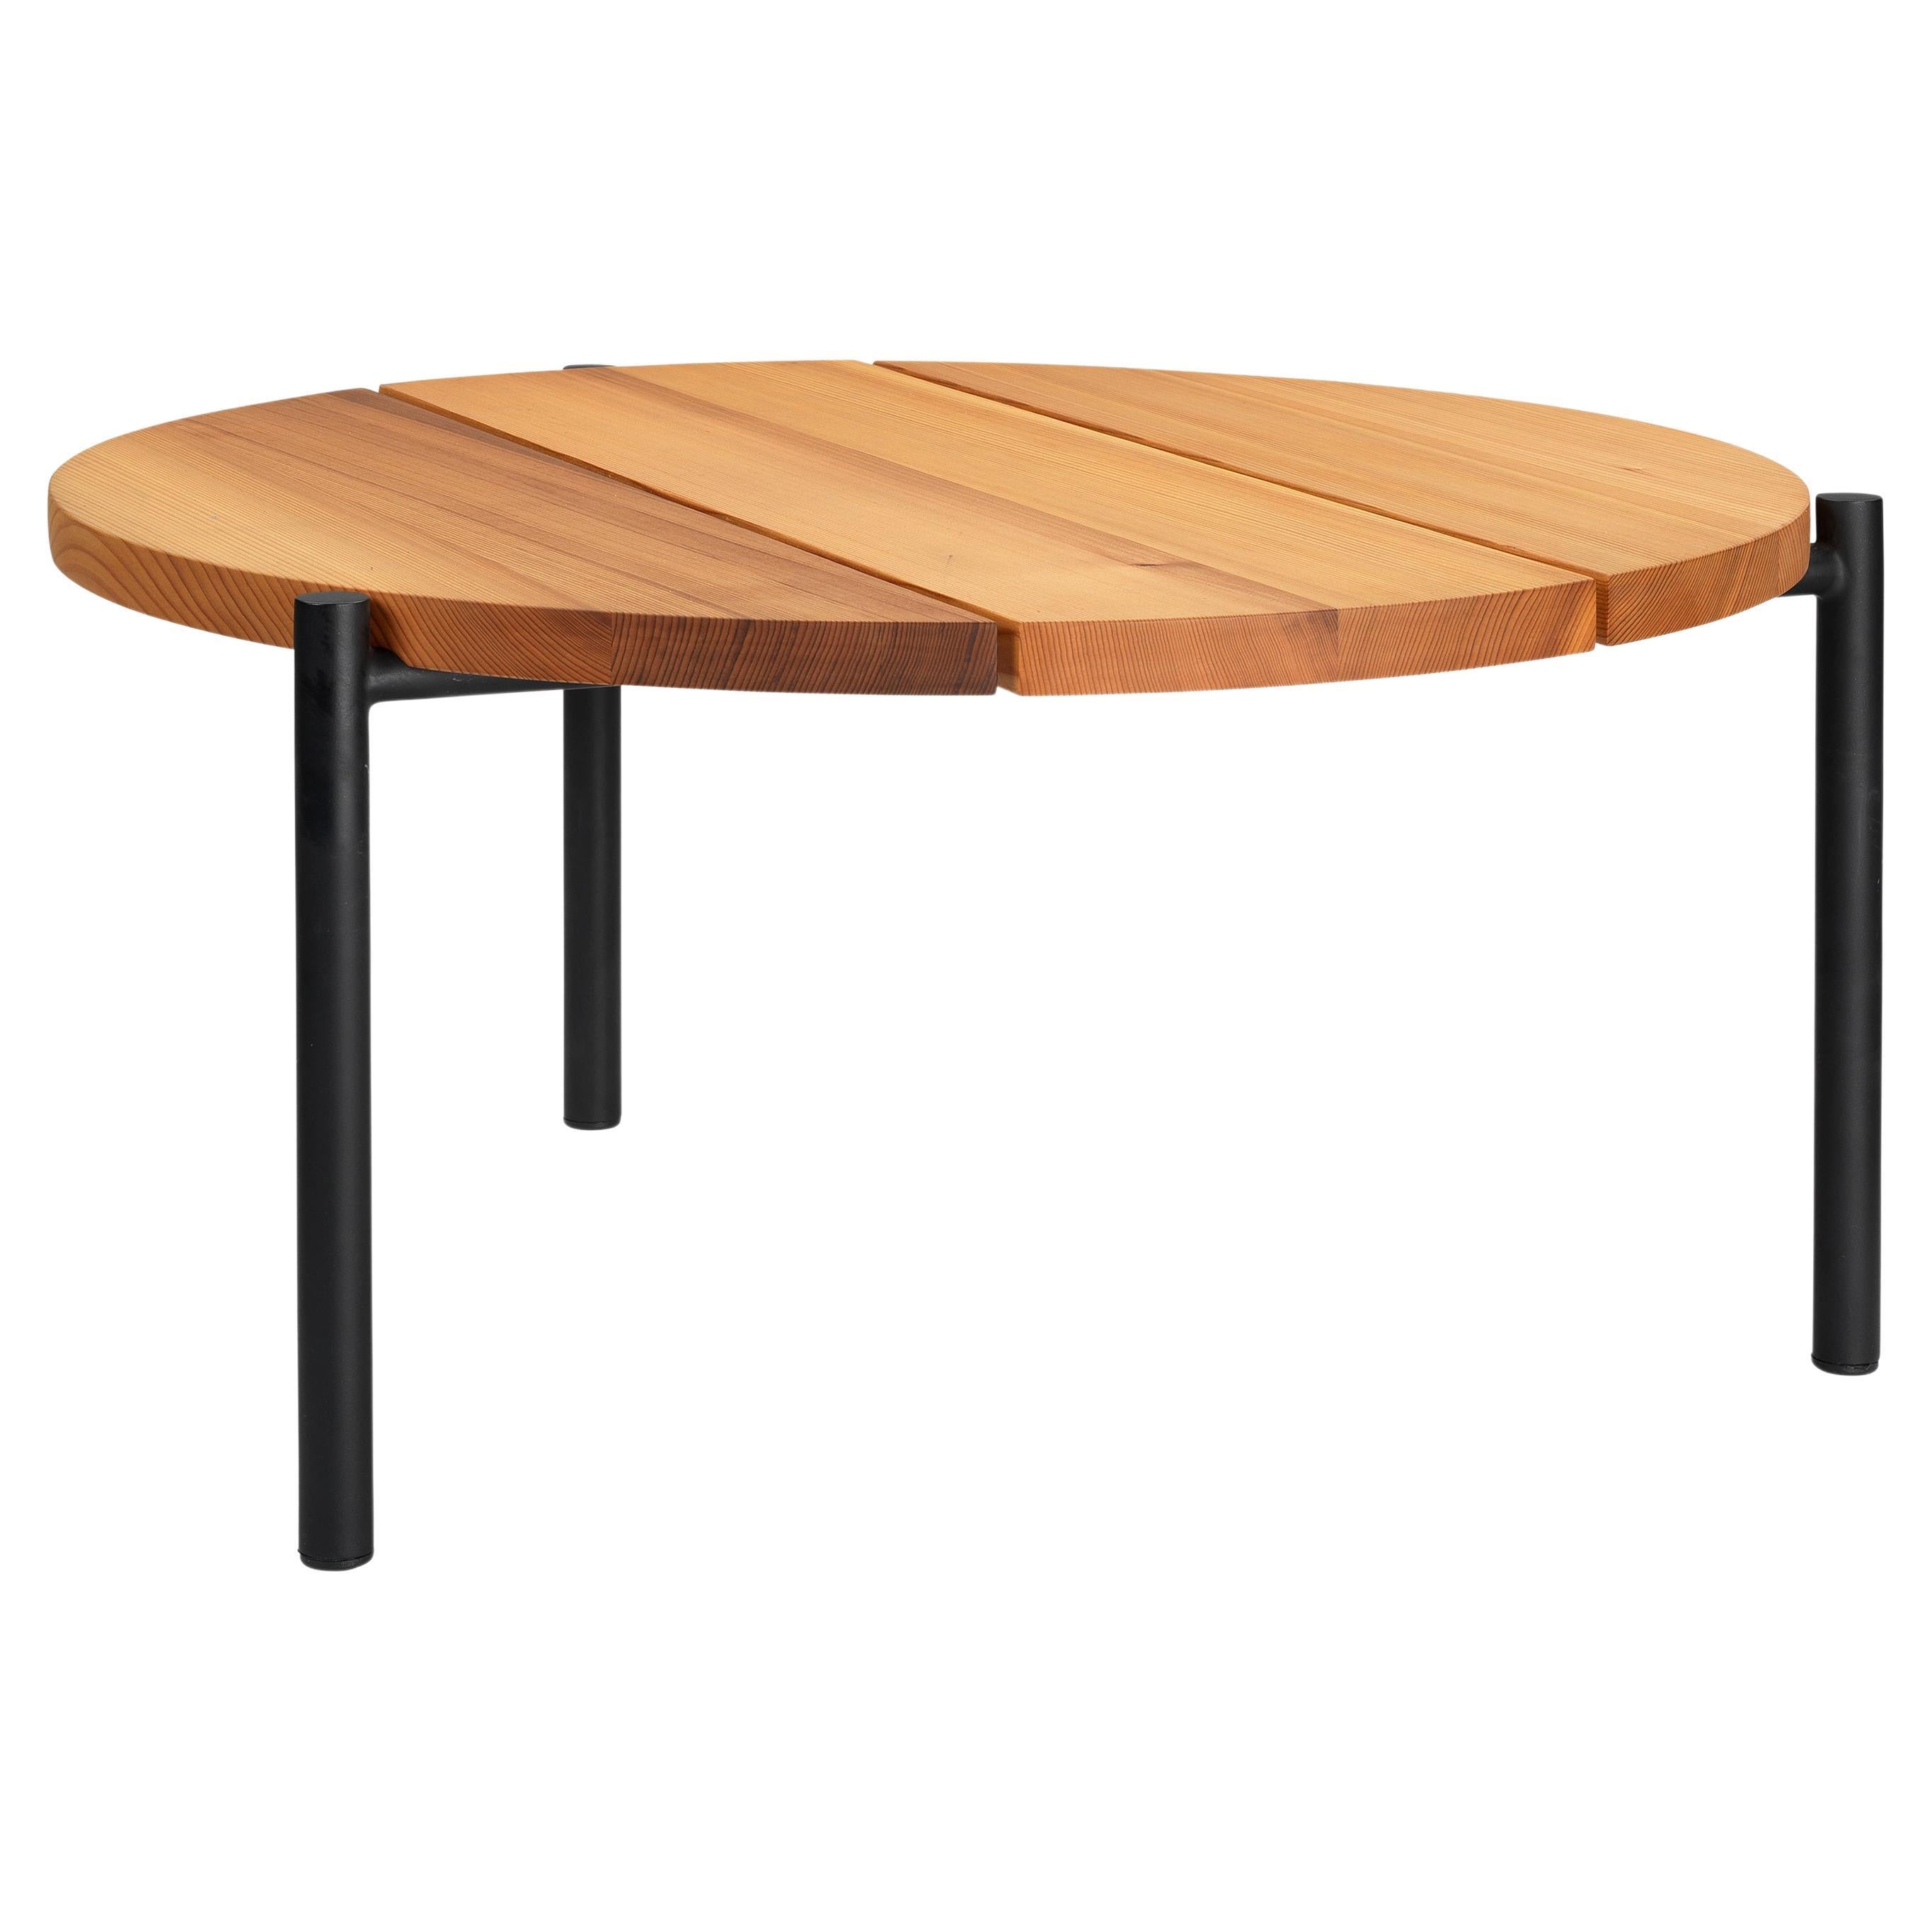 Ten10 Madeira Line Round Side Table Solid Plank Cedar Top Stainless Steel Base